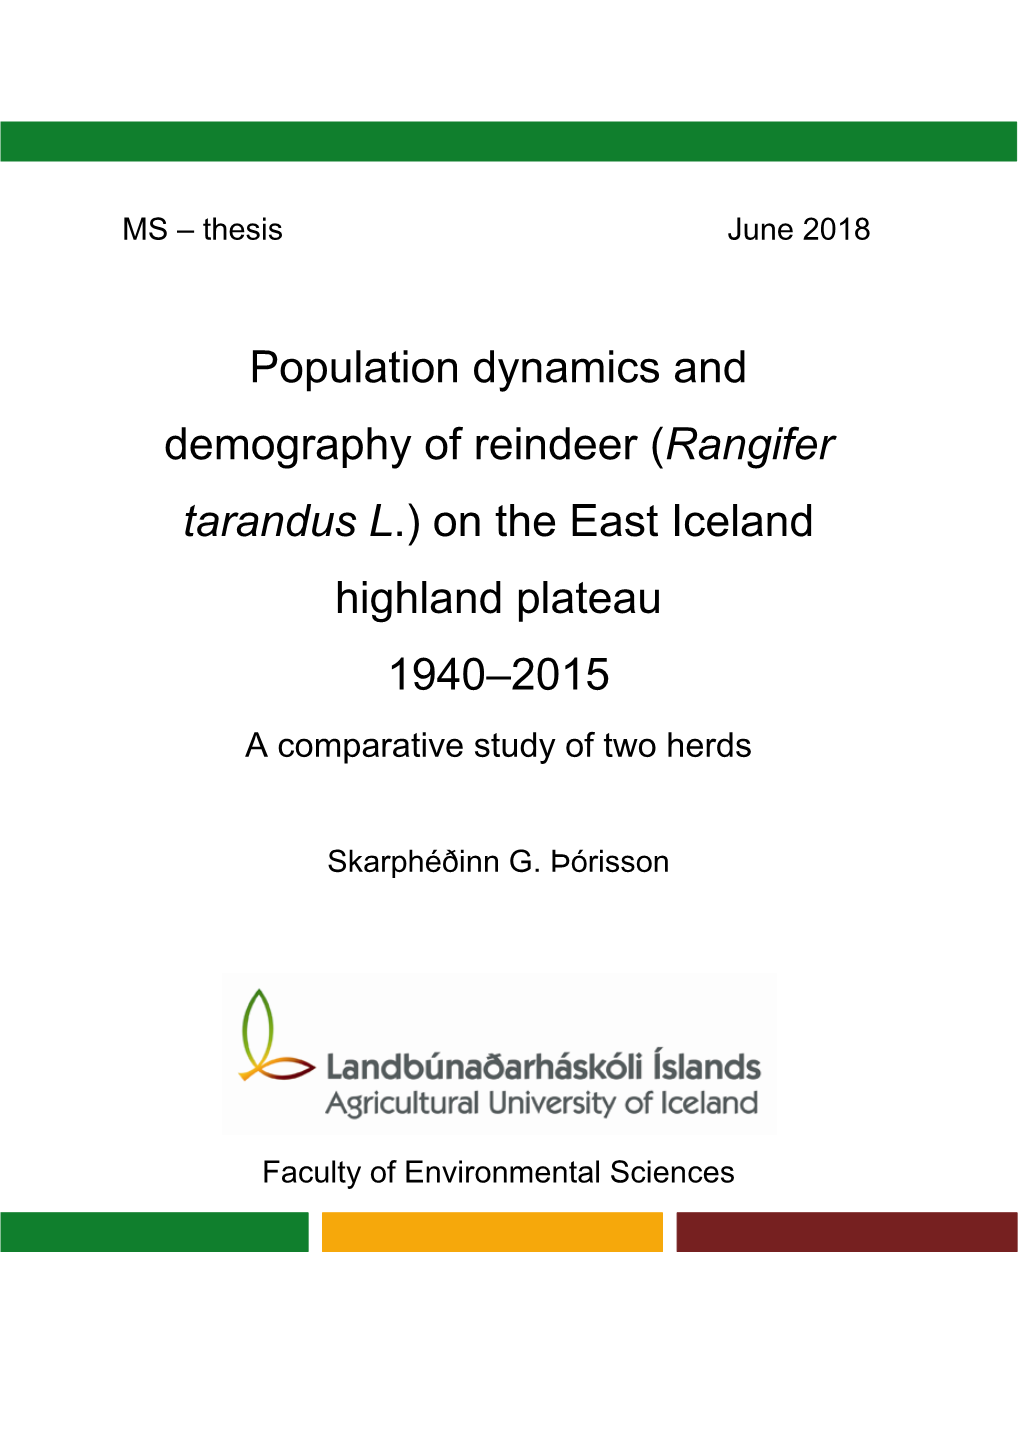 Population Dynamics and Demography of Reindeer (Rangifer Tarandus L.) on the East Iceland Highland Plateau 1940–2015 a Comparative Study of Two Herds